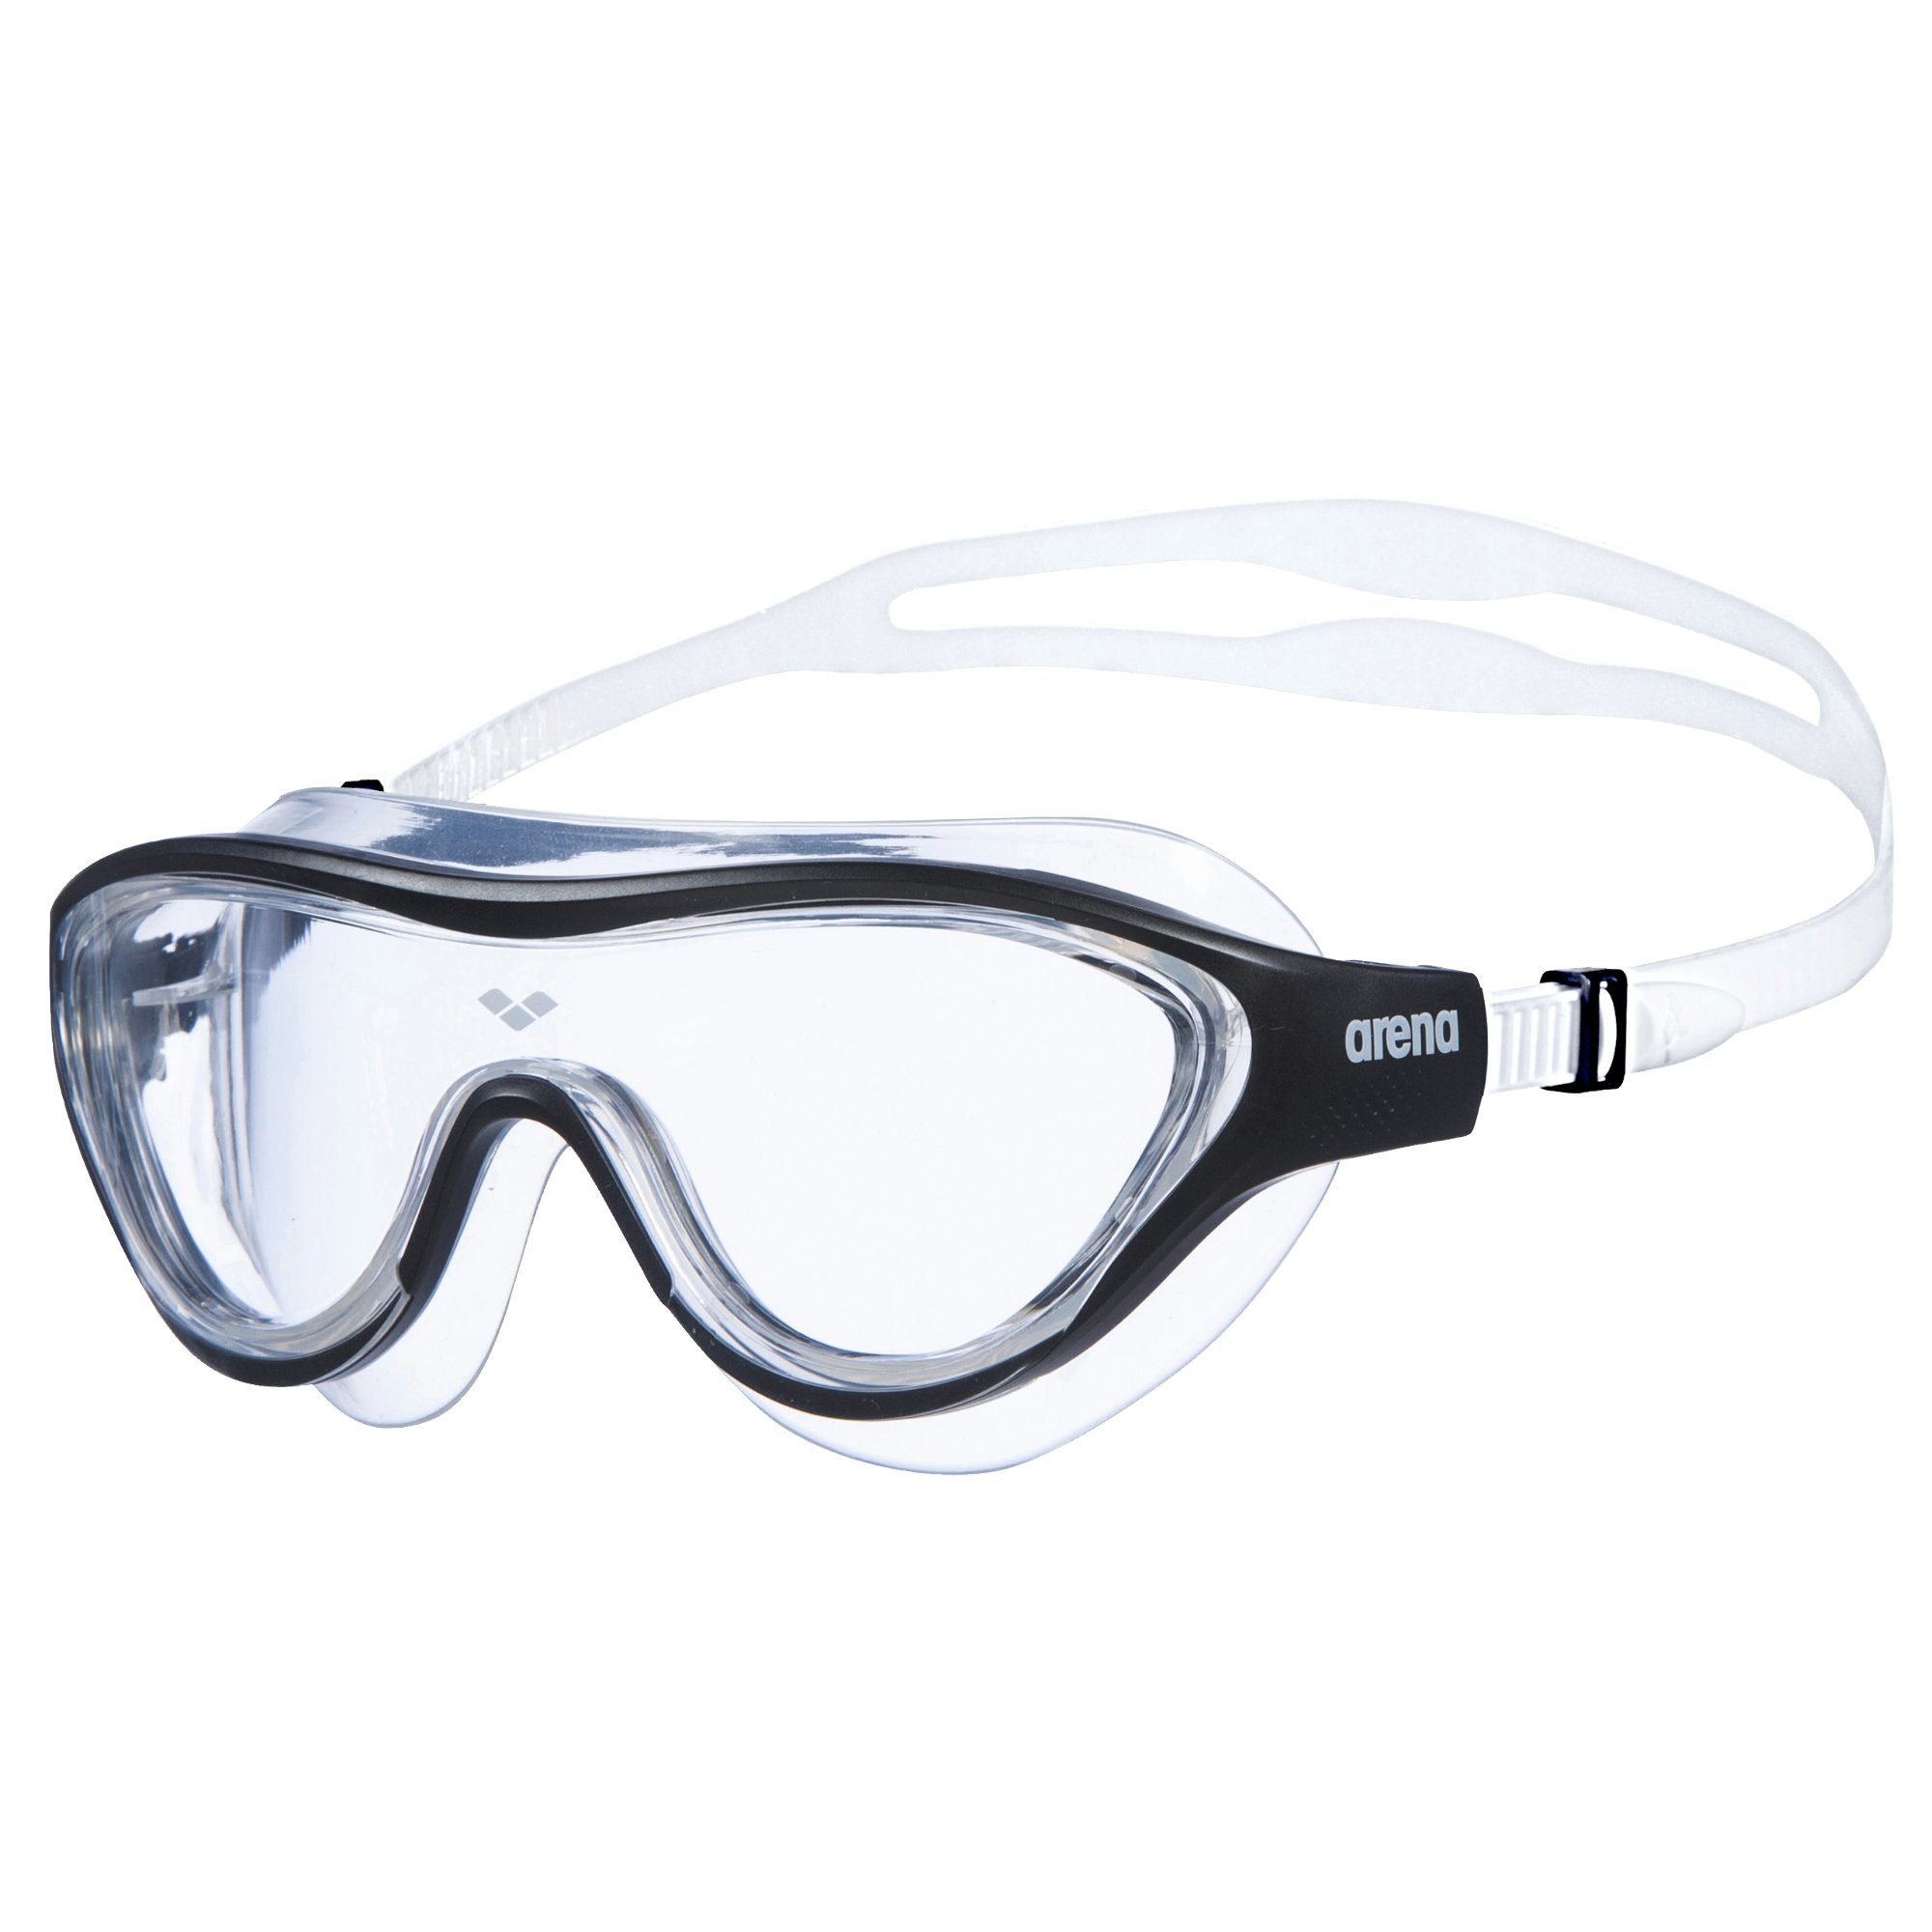 Schwimmbrille The Arena Mask arena clear-black-transparant One